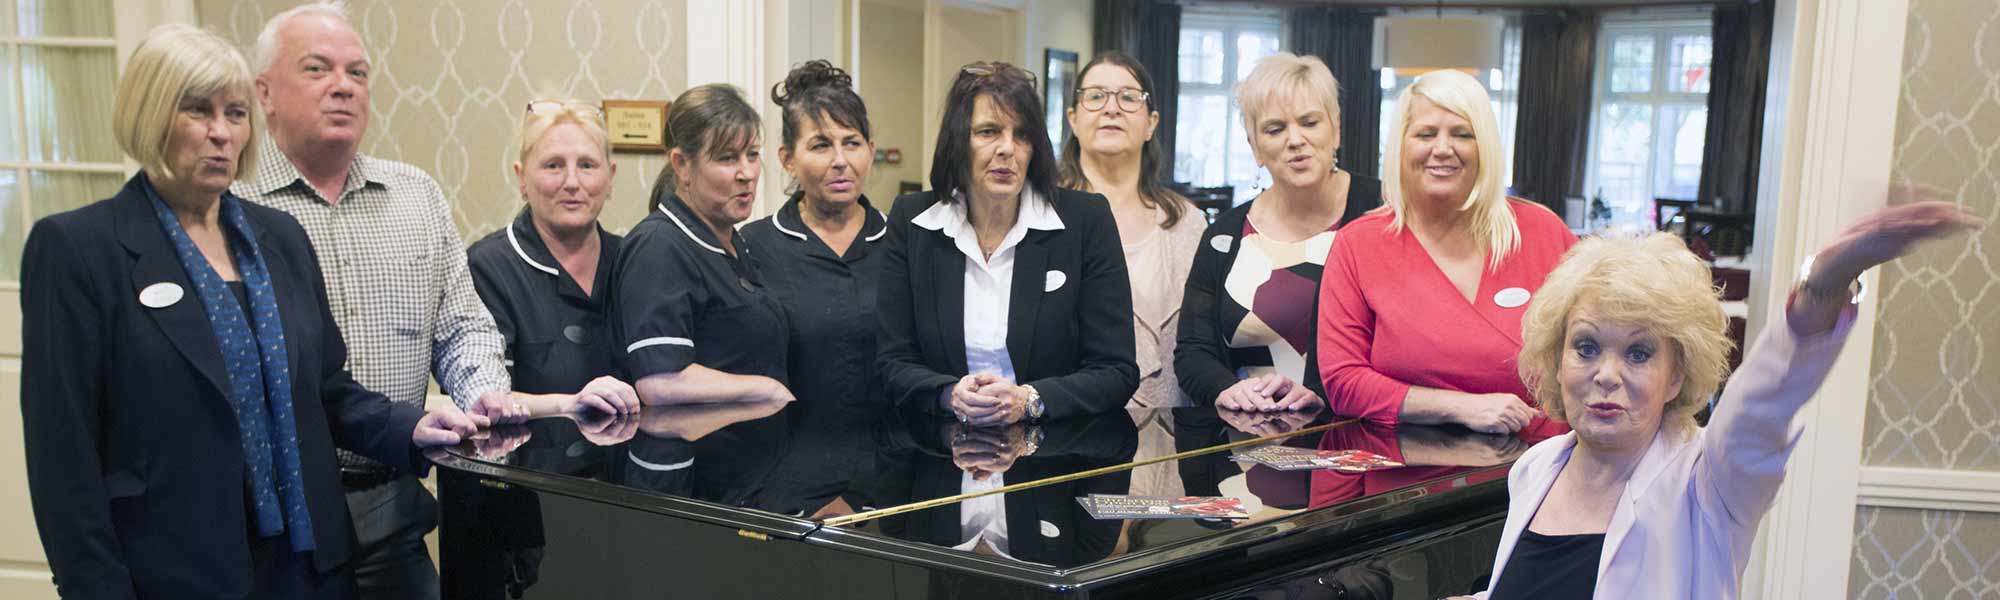 Sherrie Hewson Birchmere House Care Home Piano sing staff